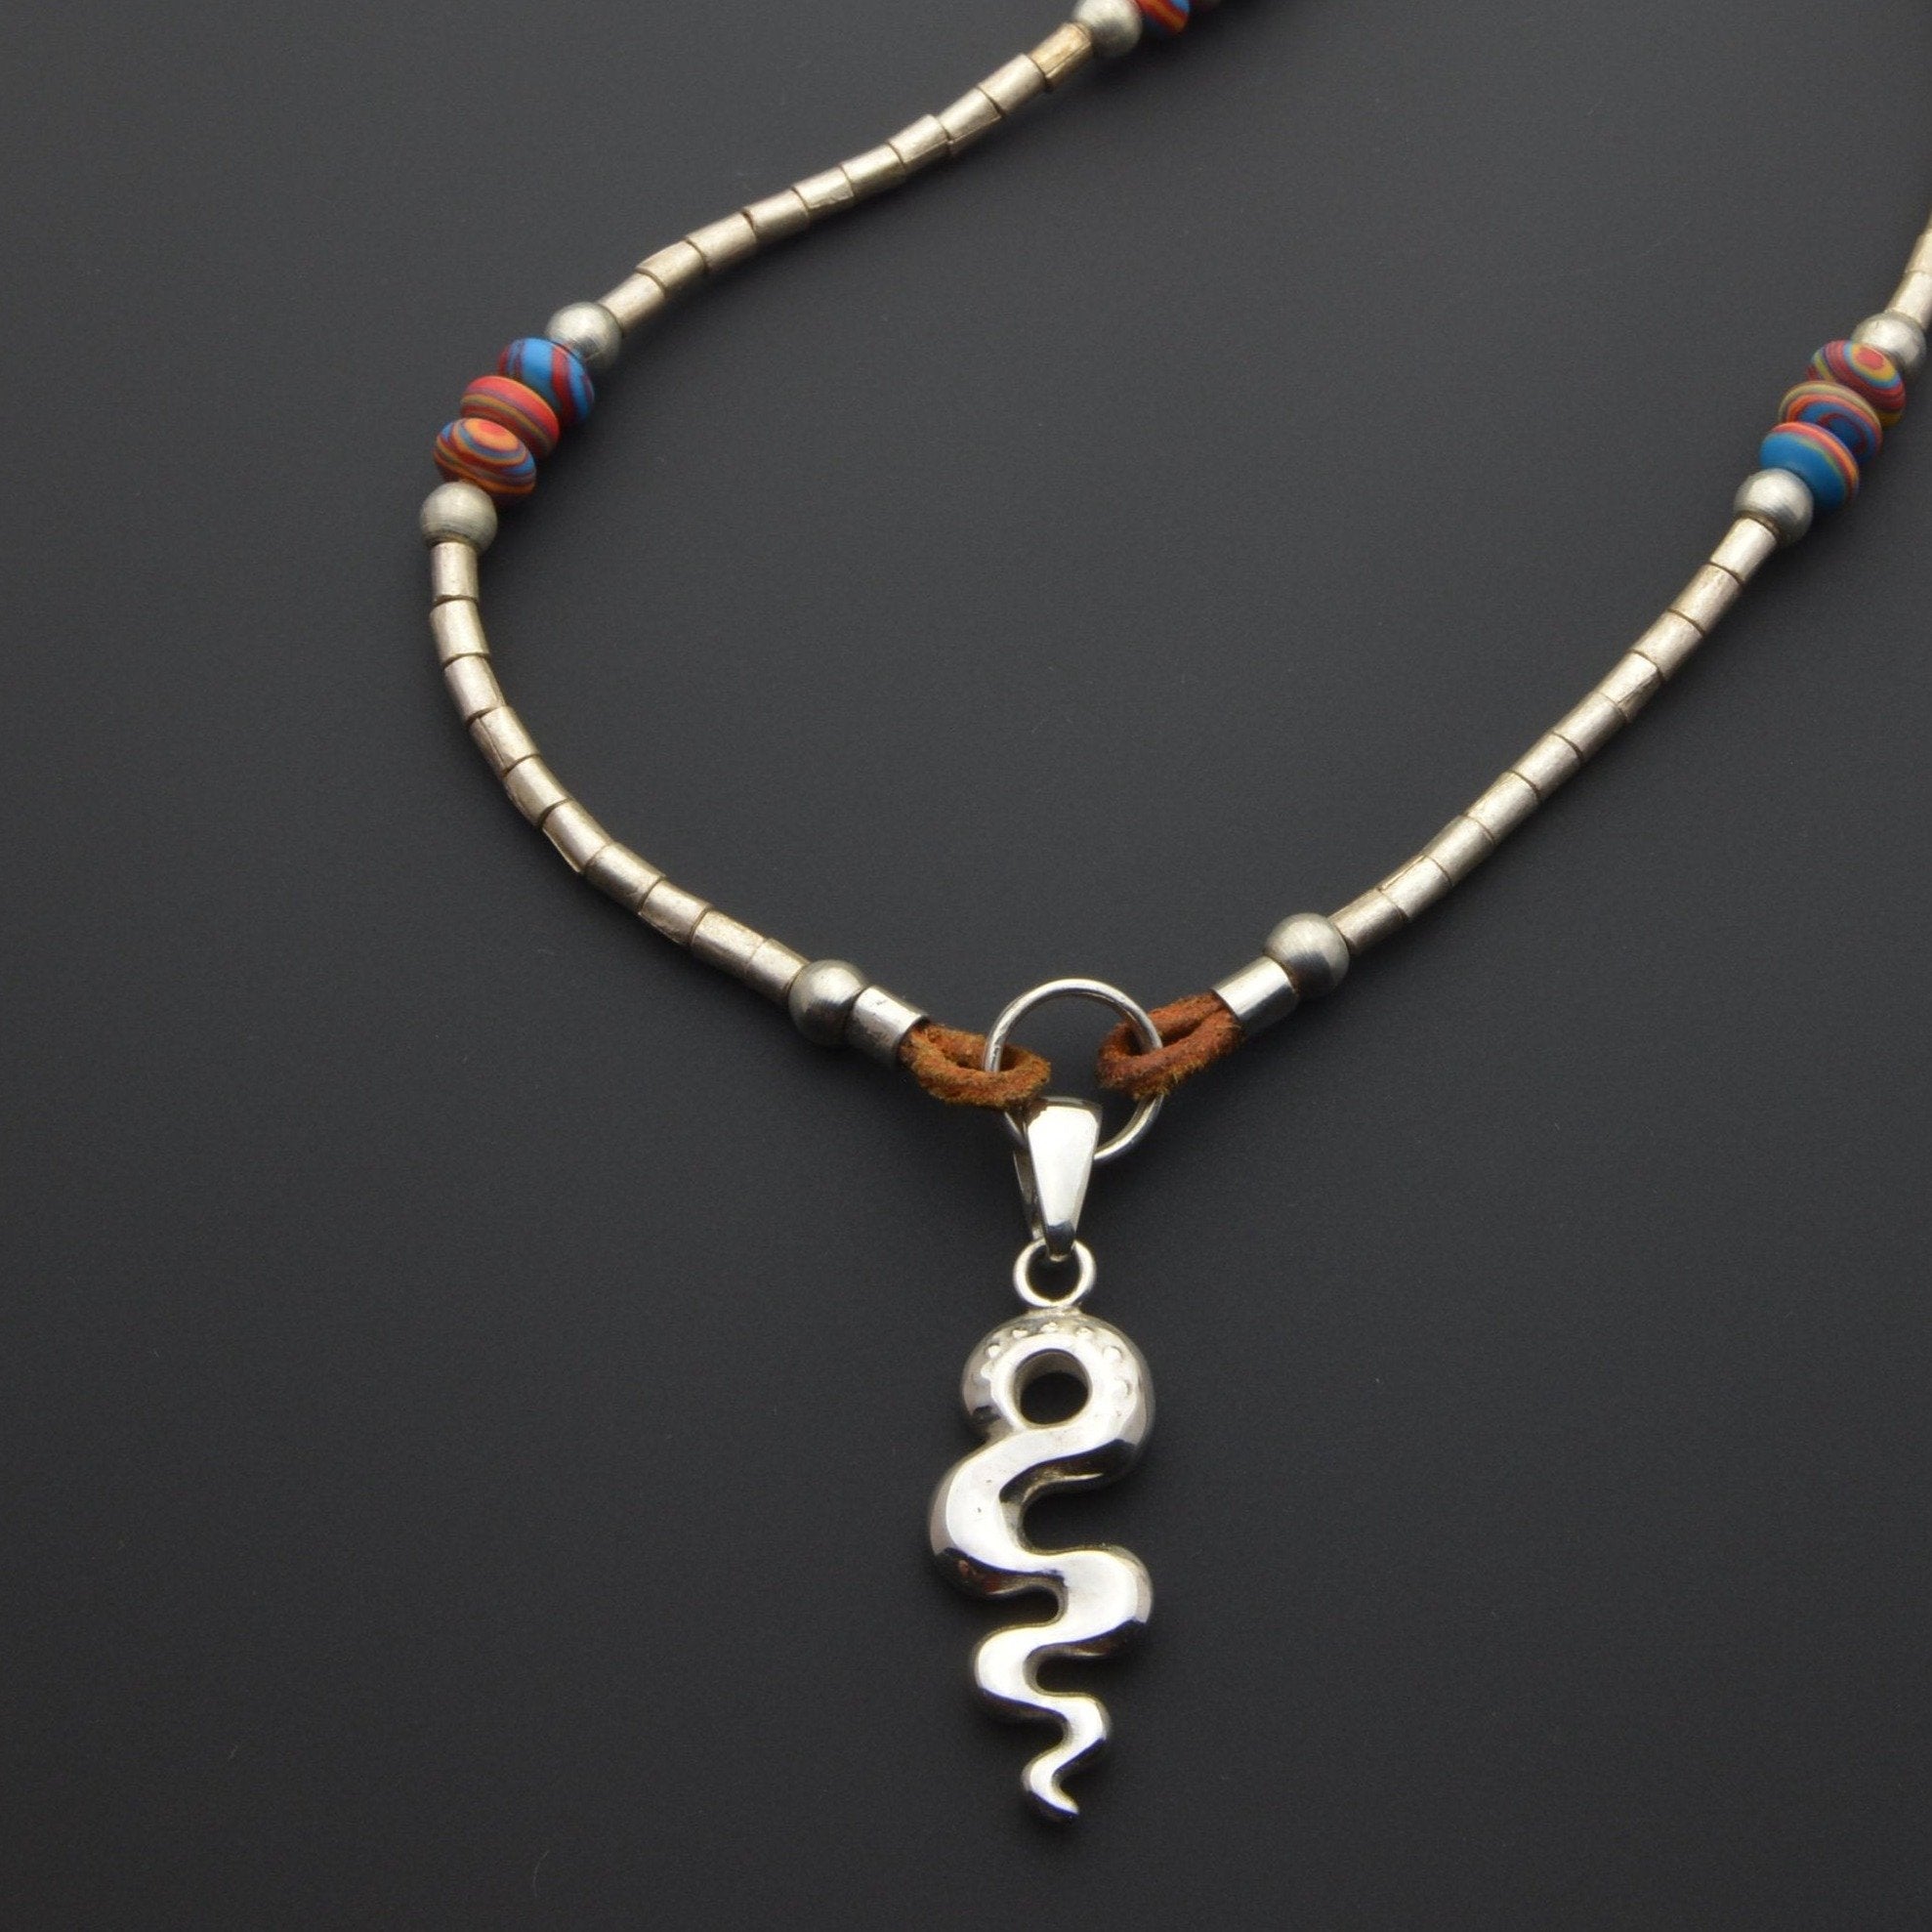 Colorful fordite beads and silver designer pendant